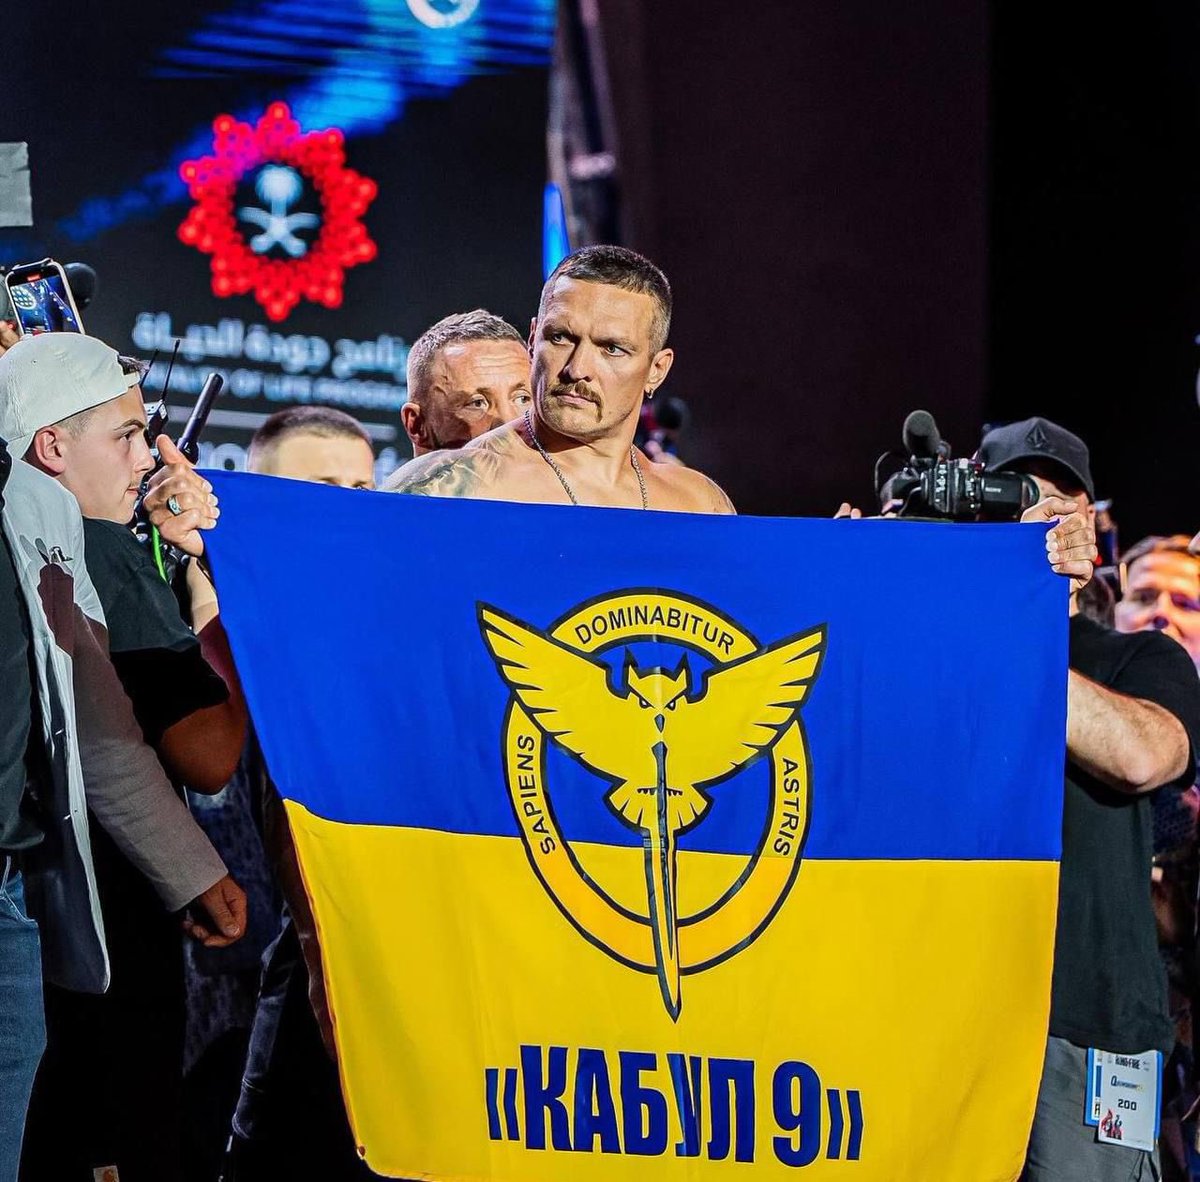 Quite the humiliation for Russia as the Absolute World Champion of Heavyweight Boxing flies the flag of Ukraine's GUR, a branch of Ukrainian Armed Forces allocated exclusively to destroying Russian invaders.